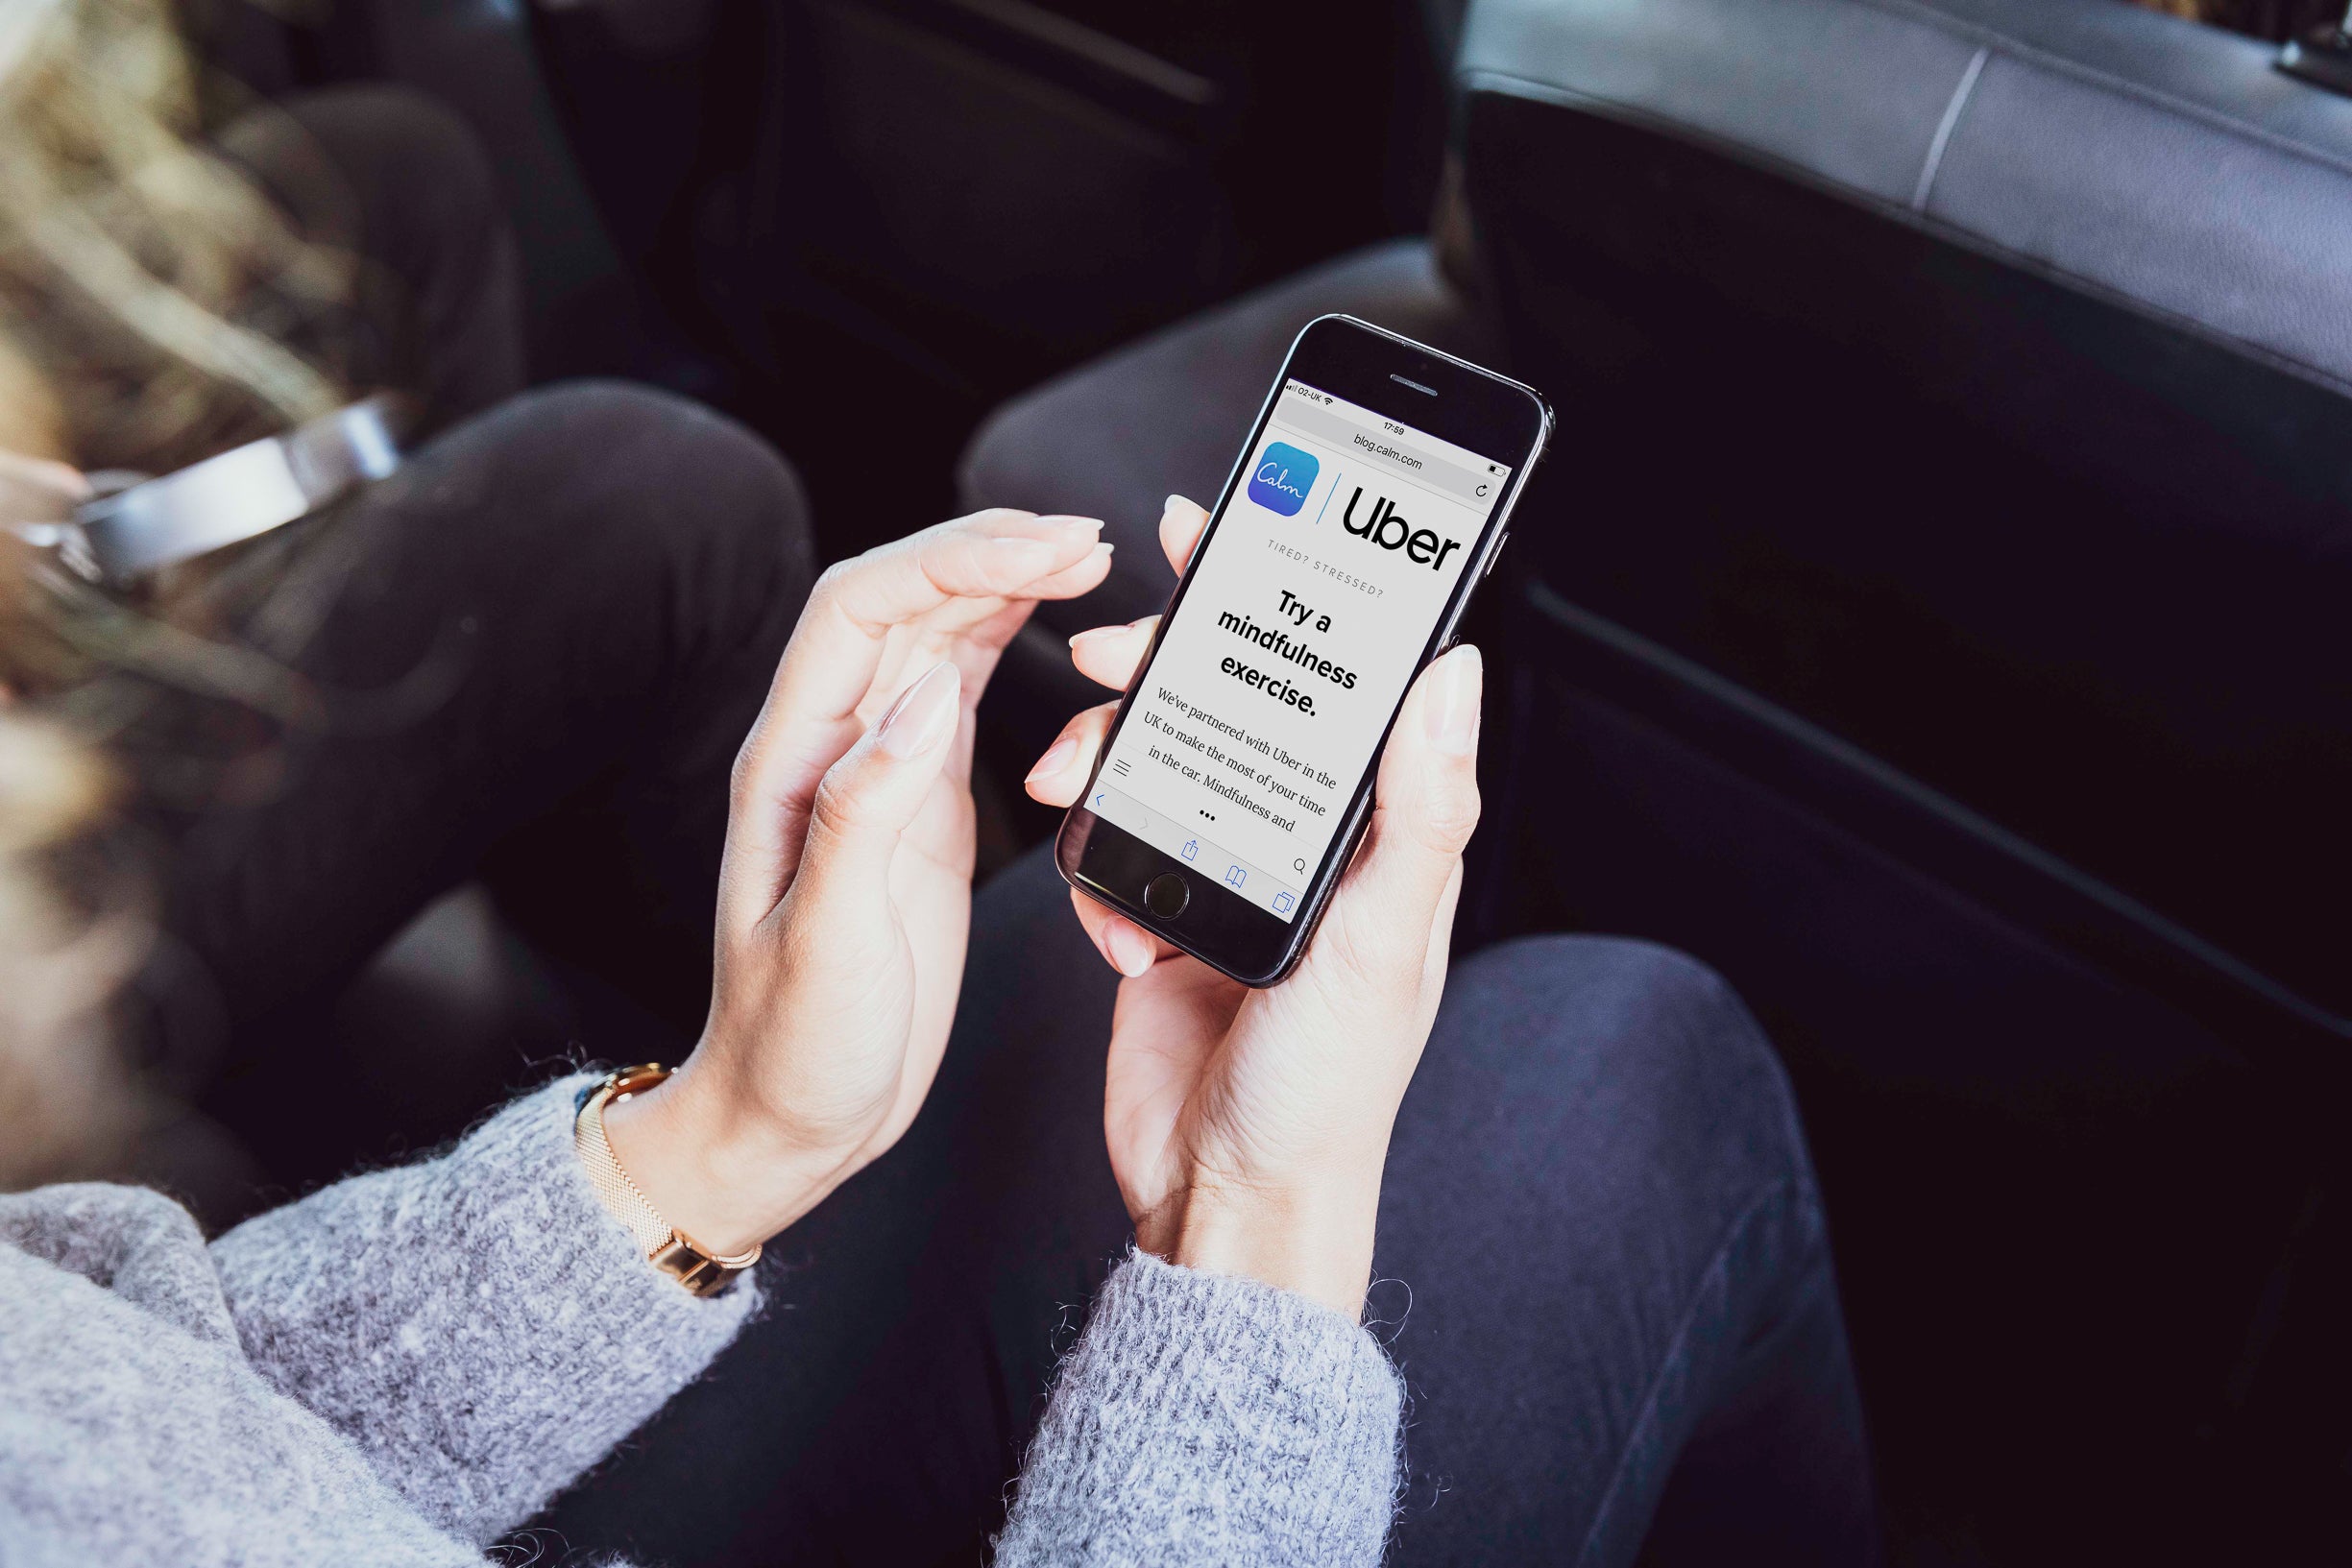 Uber is launching mindfulness exercises with meditation app Calm